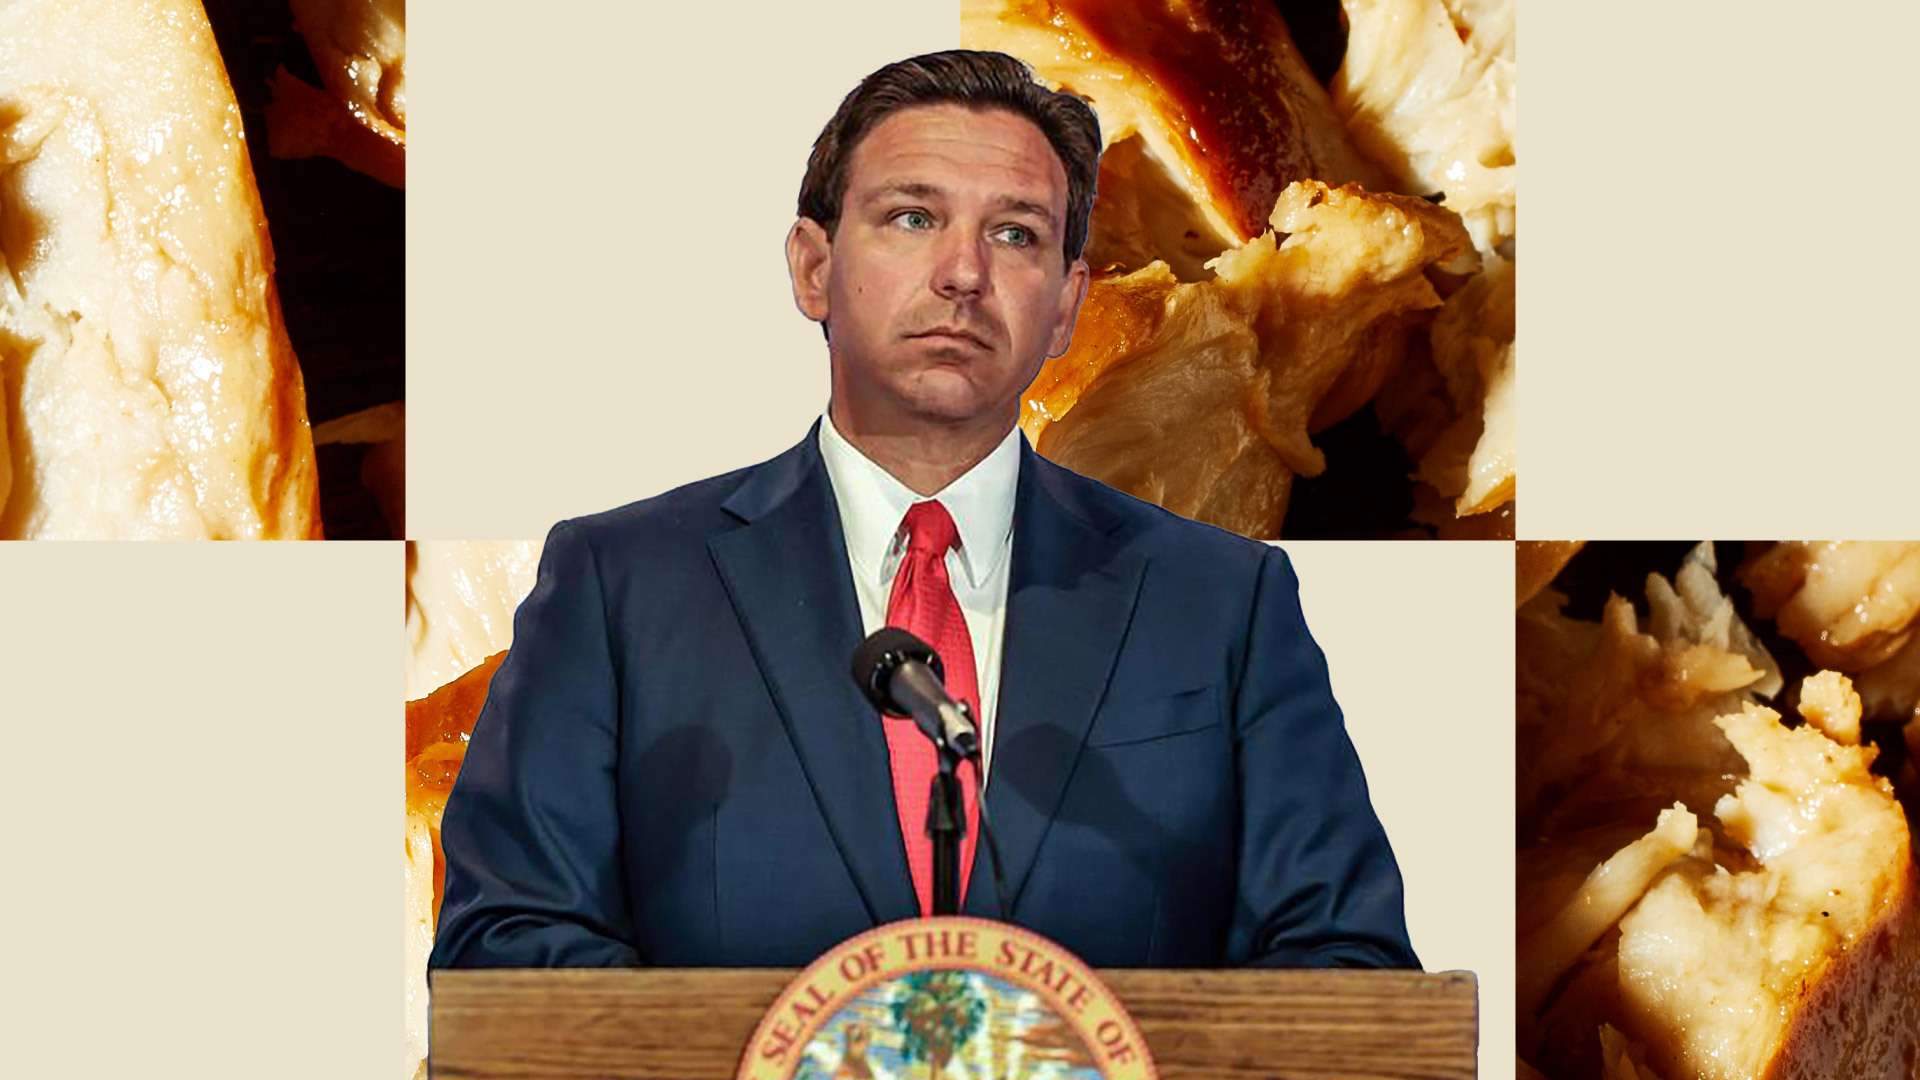 On Wednesday, Florida Gov. Ron DeSantis (R) signed a bill banning the sale or production of lab-grown meat in the state. While a press release framed 